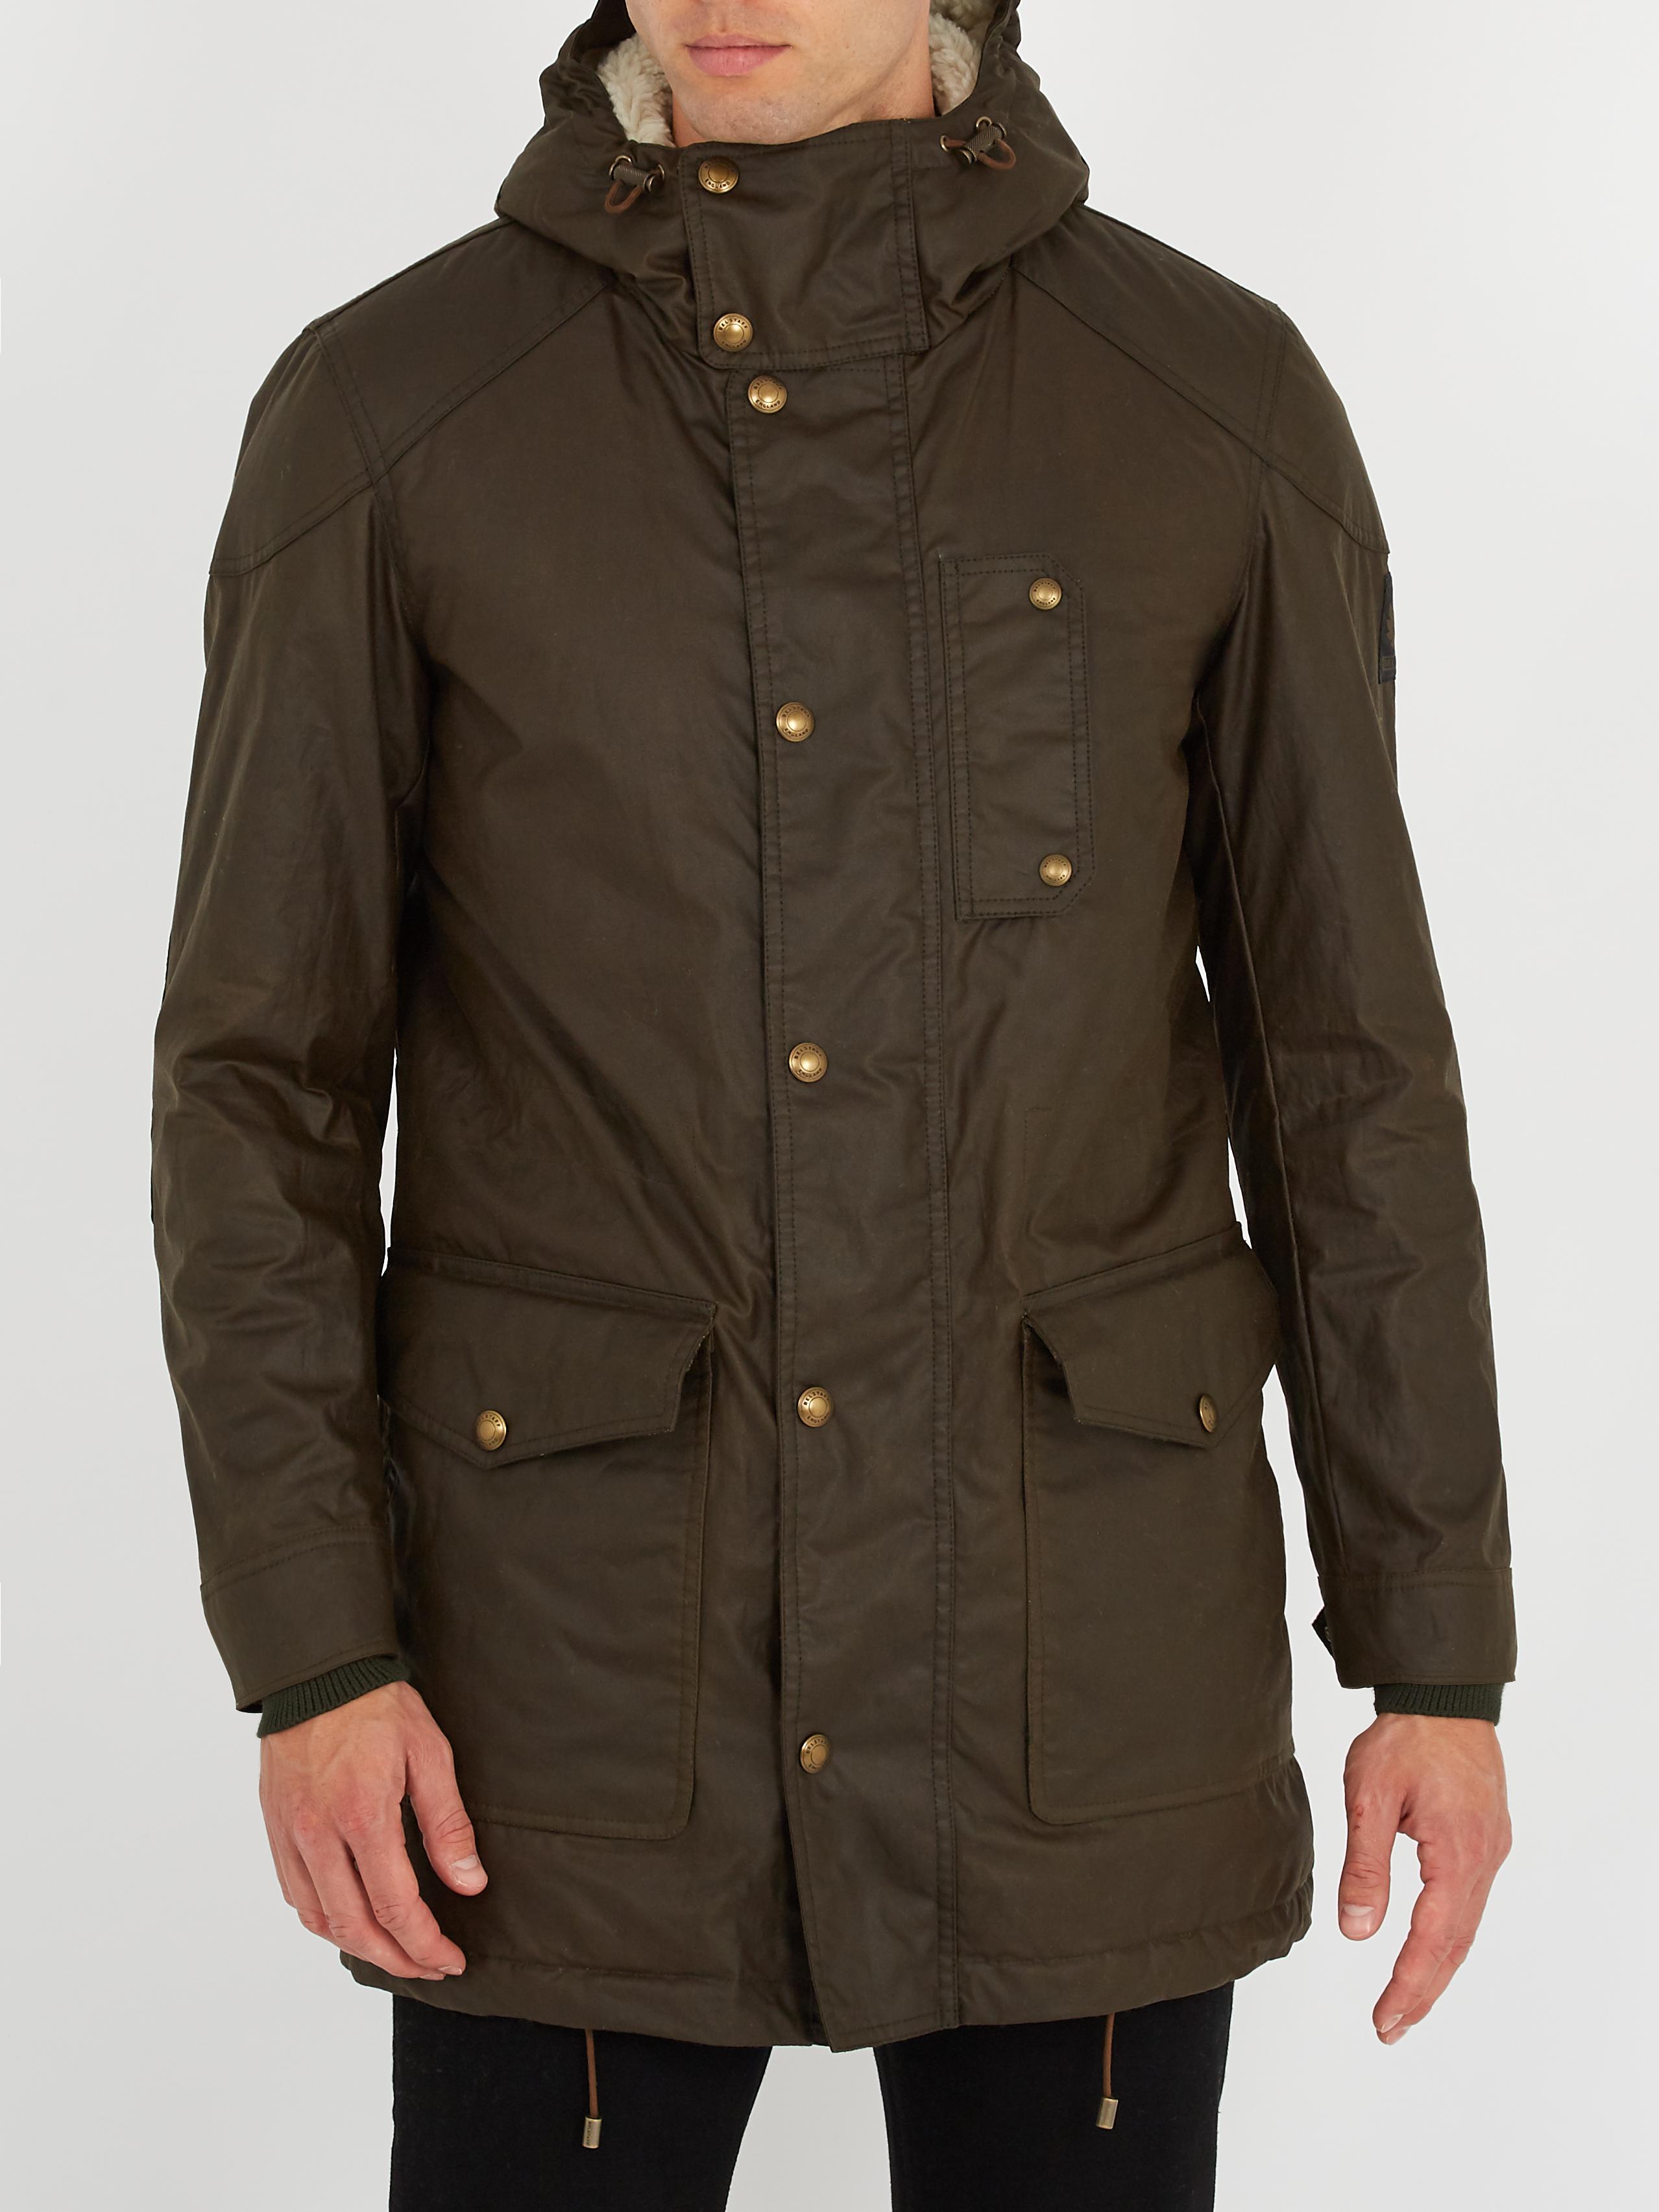 Belstaff Kentchurch Waxed-cotton Parka in Faded Olive (Green) for Men - Lyst